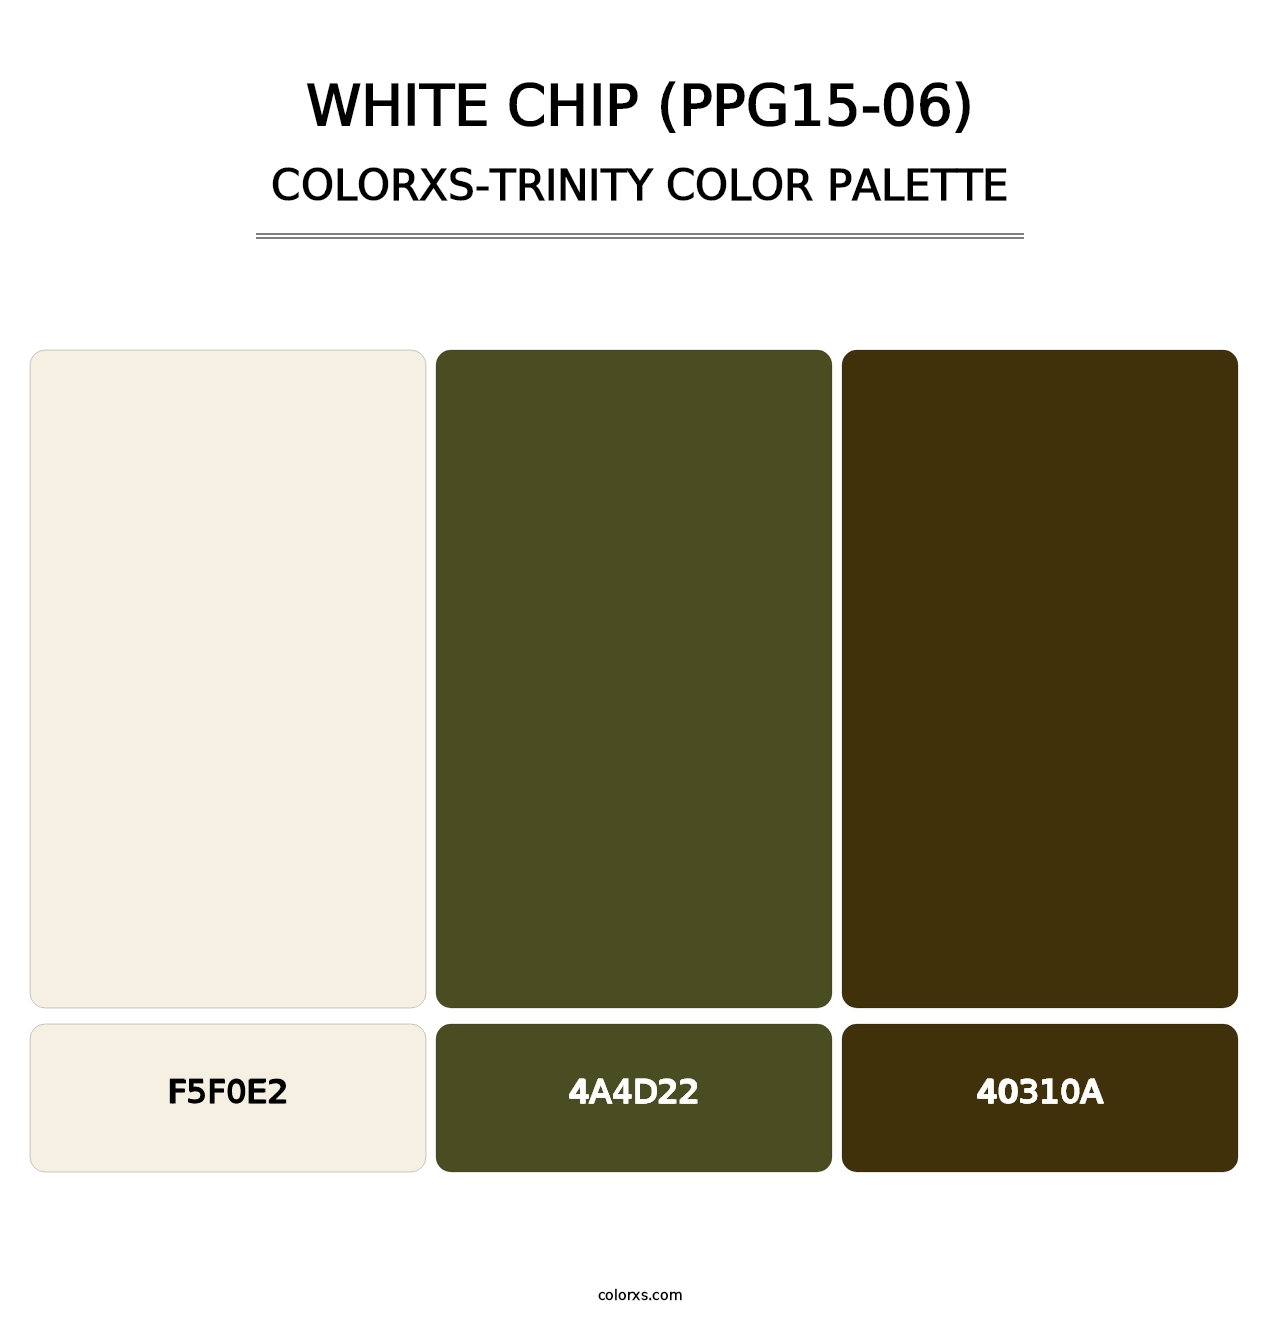 White Chip (PPG15-06) - Colorxs Trinity Palette